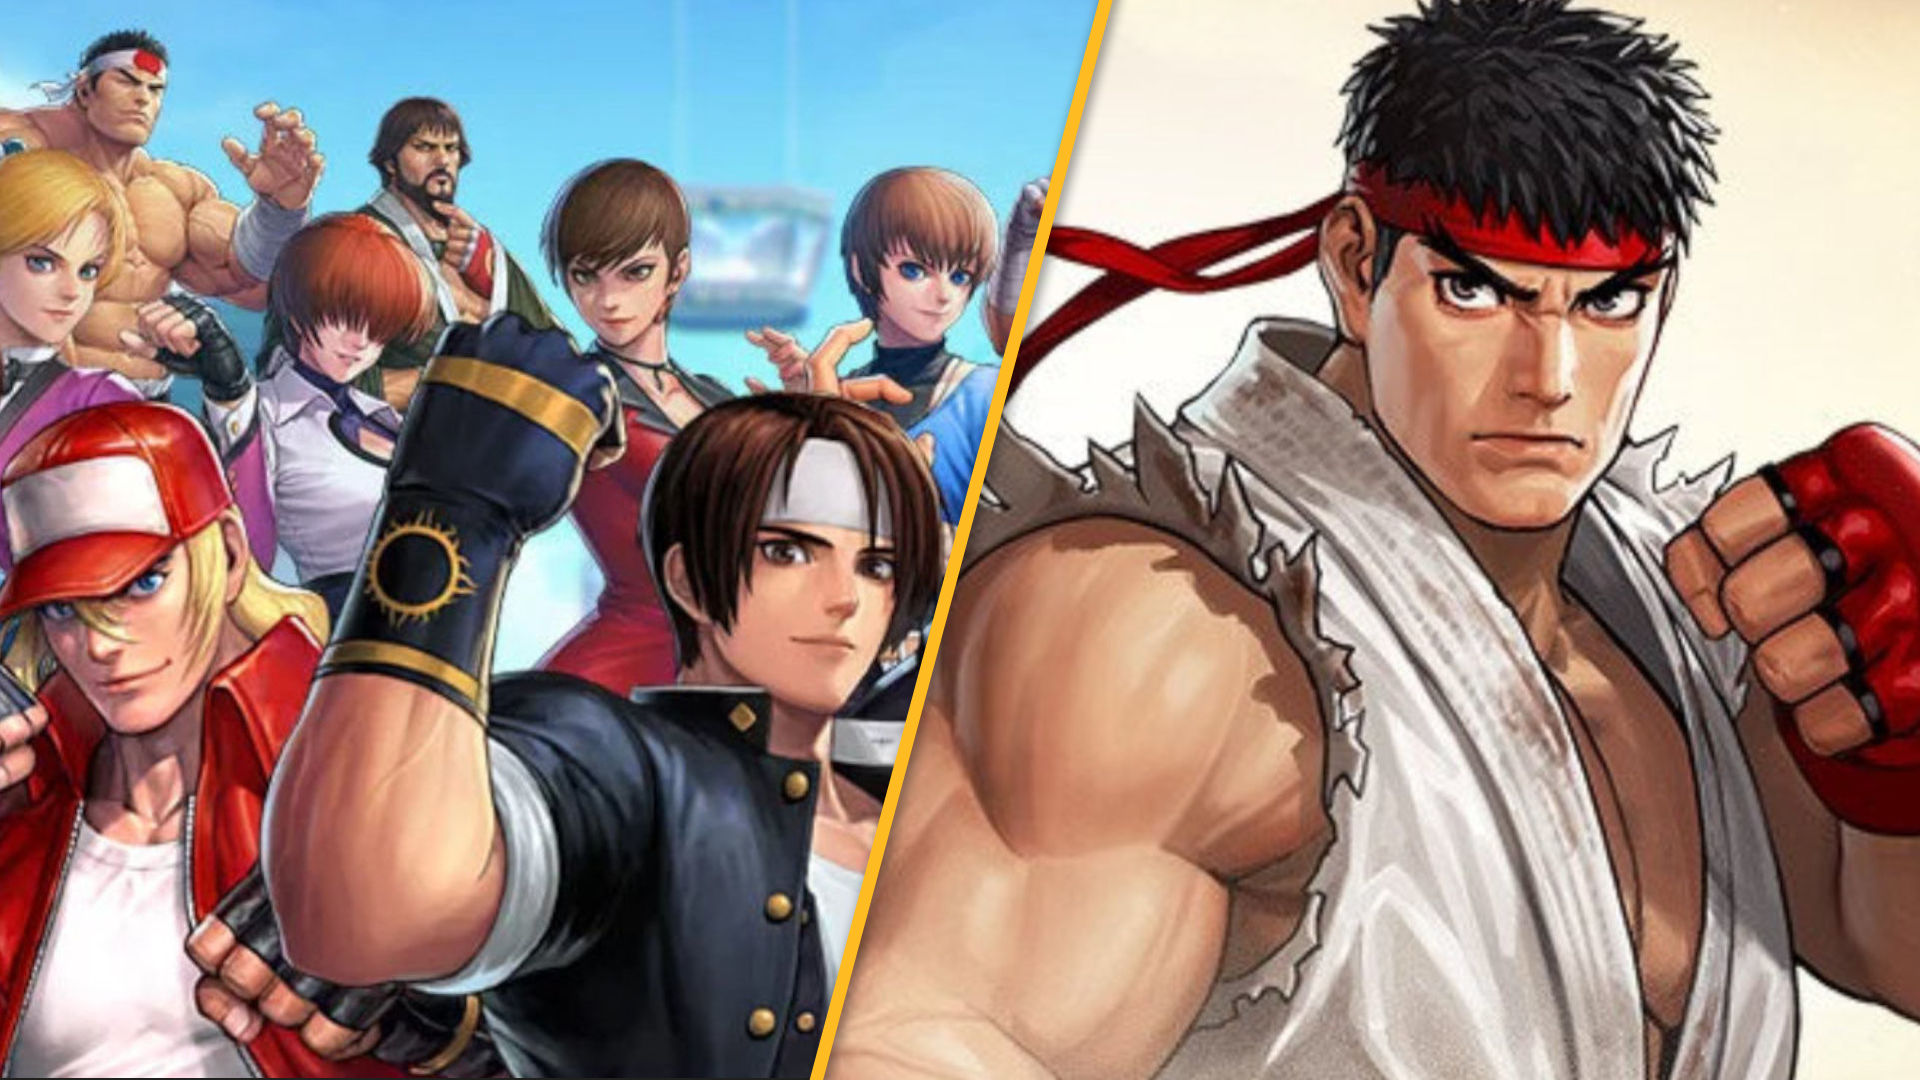 Which franchise is more popular: Street Fighter or King of